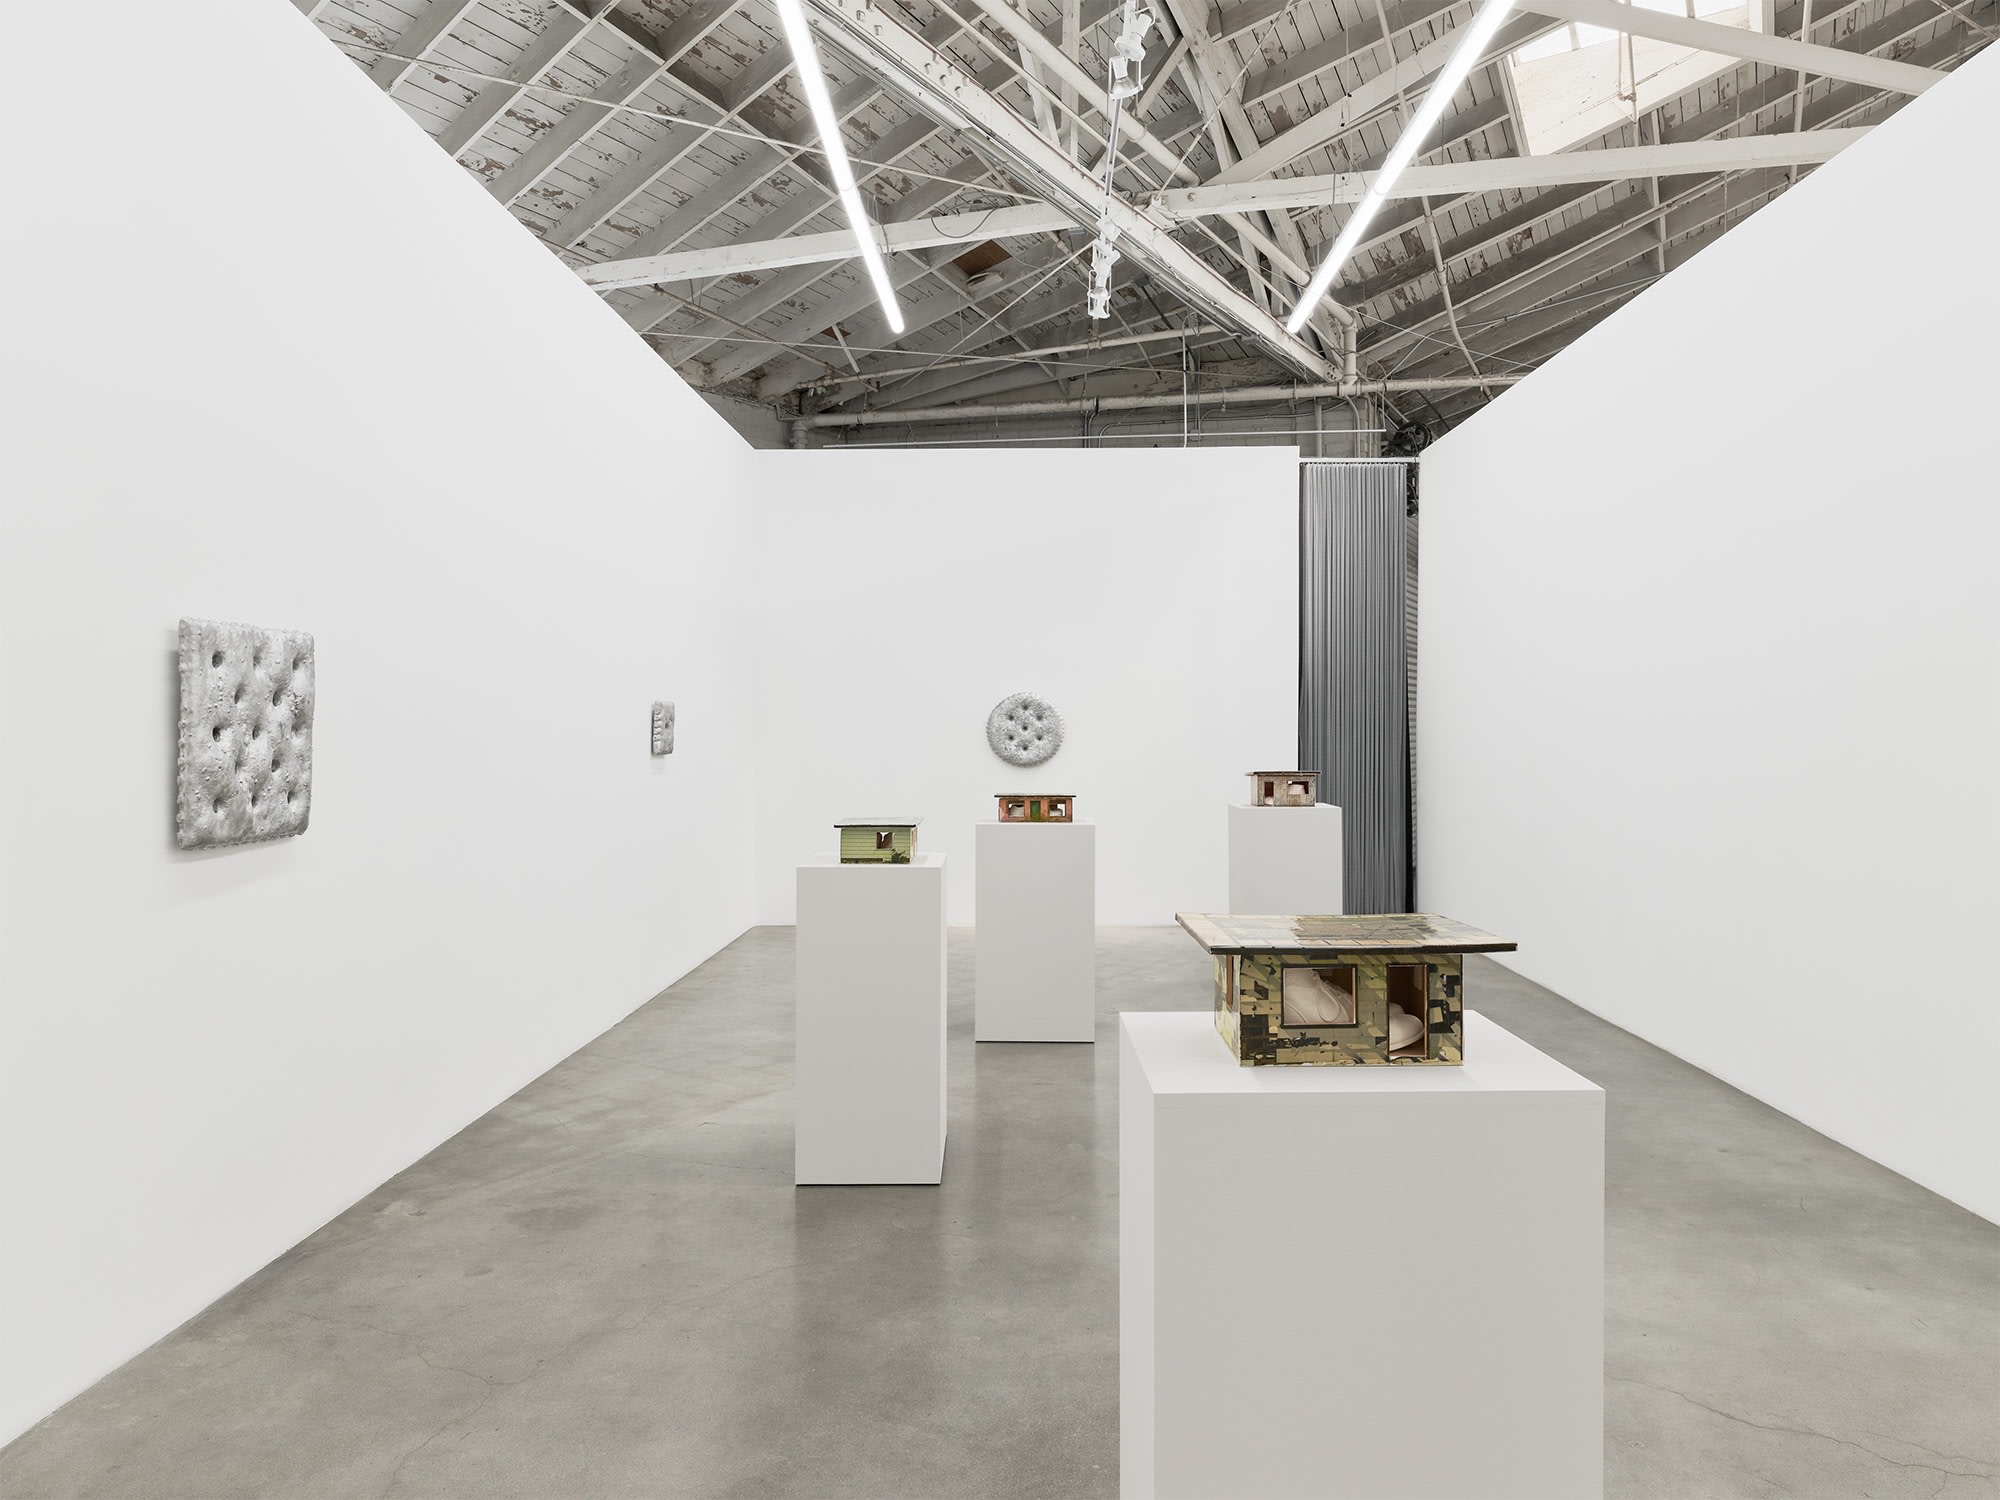 Installation view of Ry Rocklen's exhibition "Sand Box Living" at Night Gallery